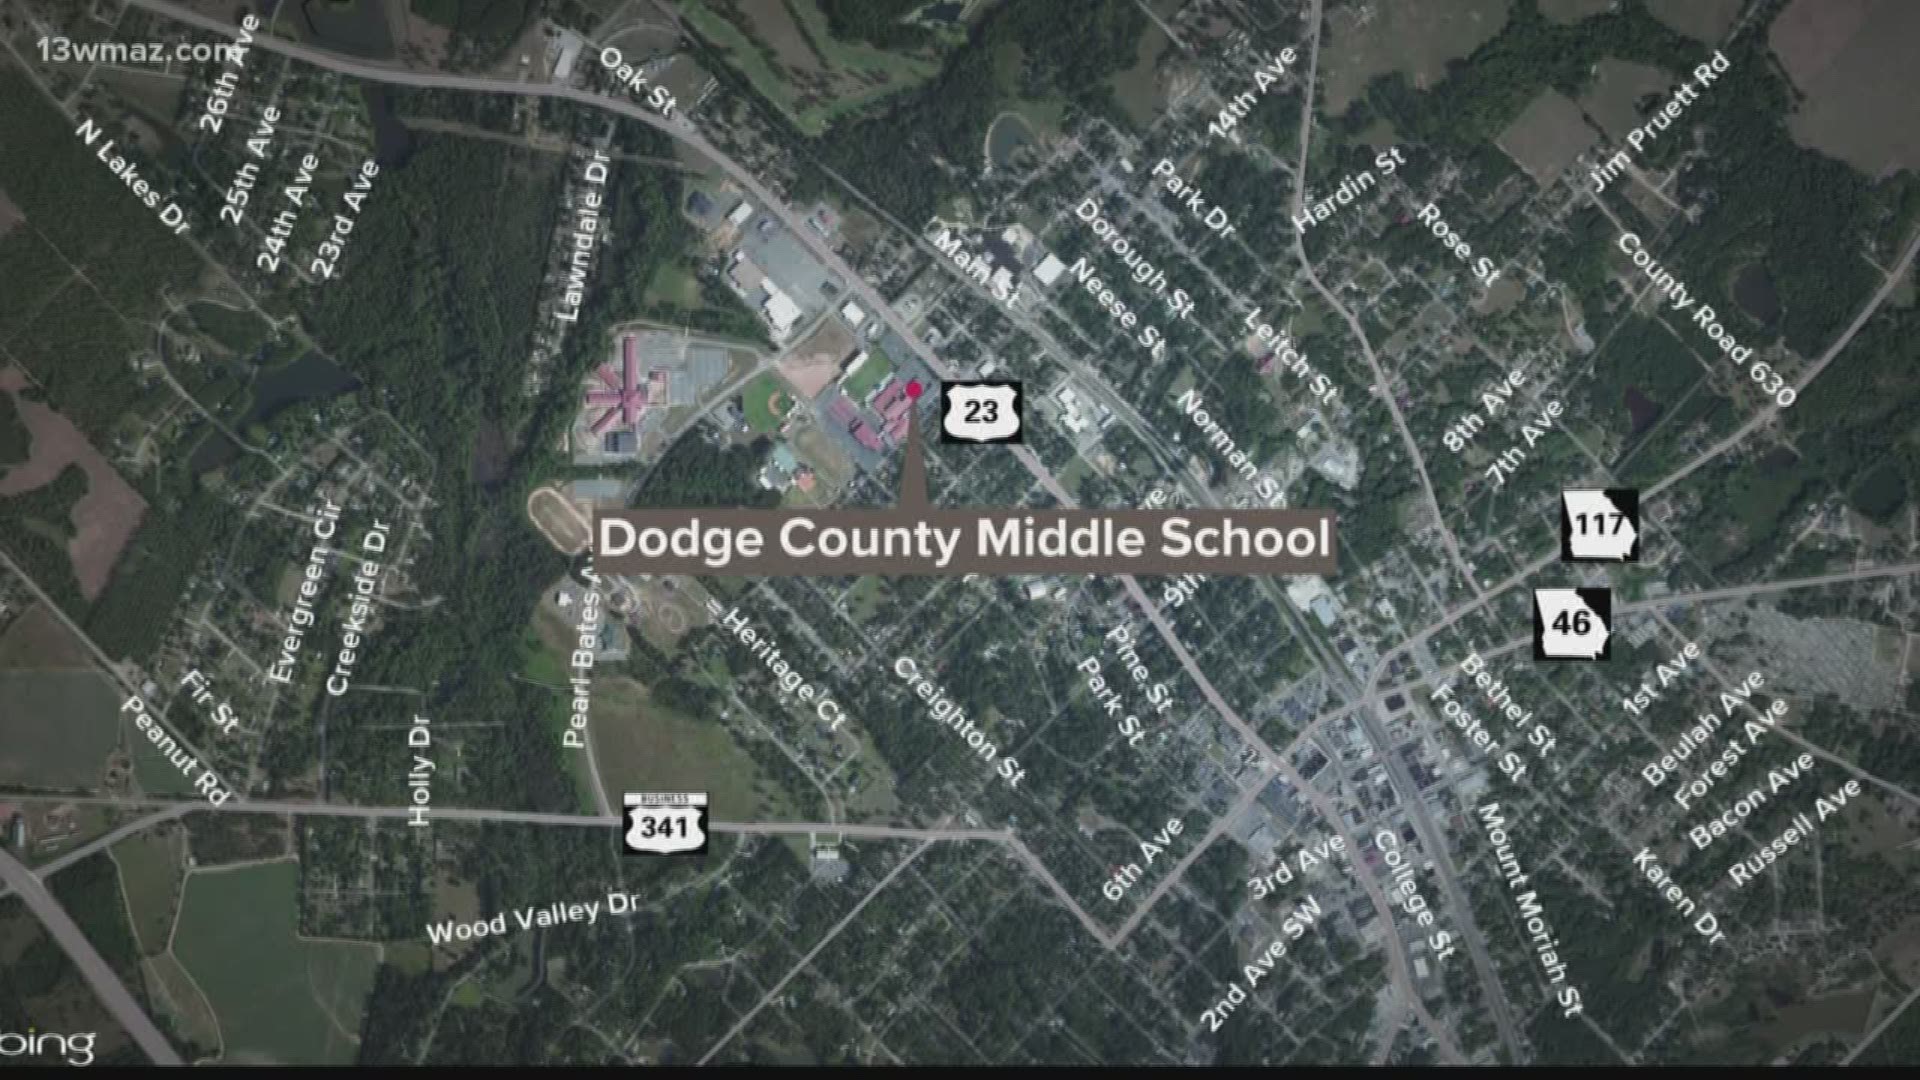 The assault allegedly involved two juvenile students